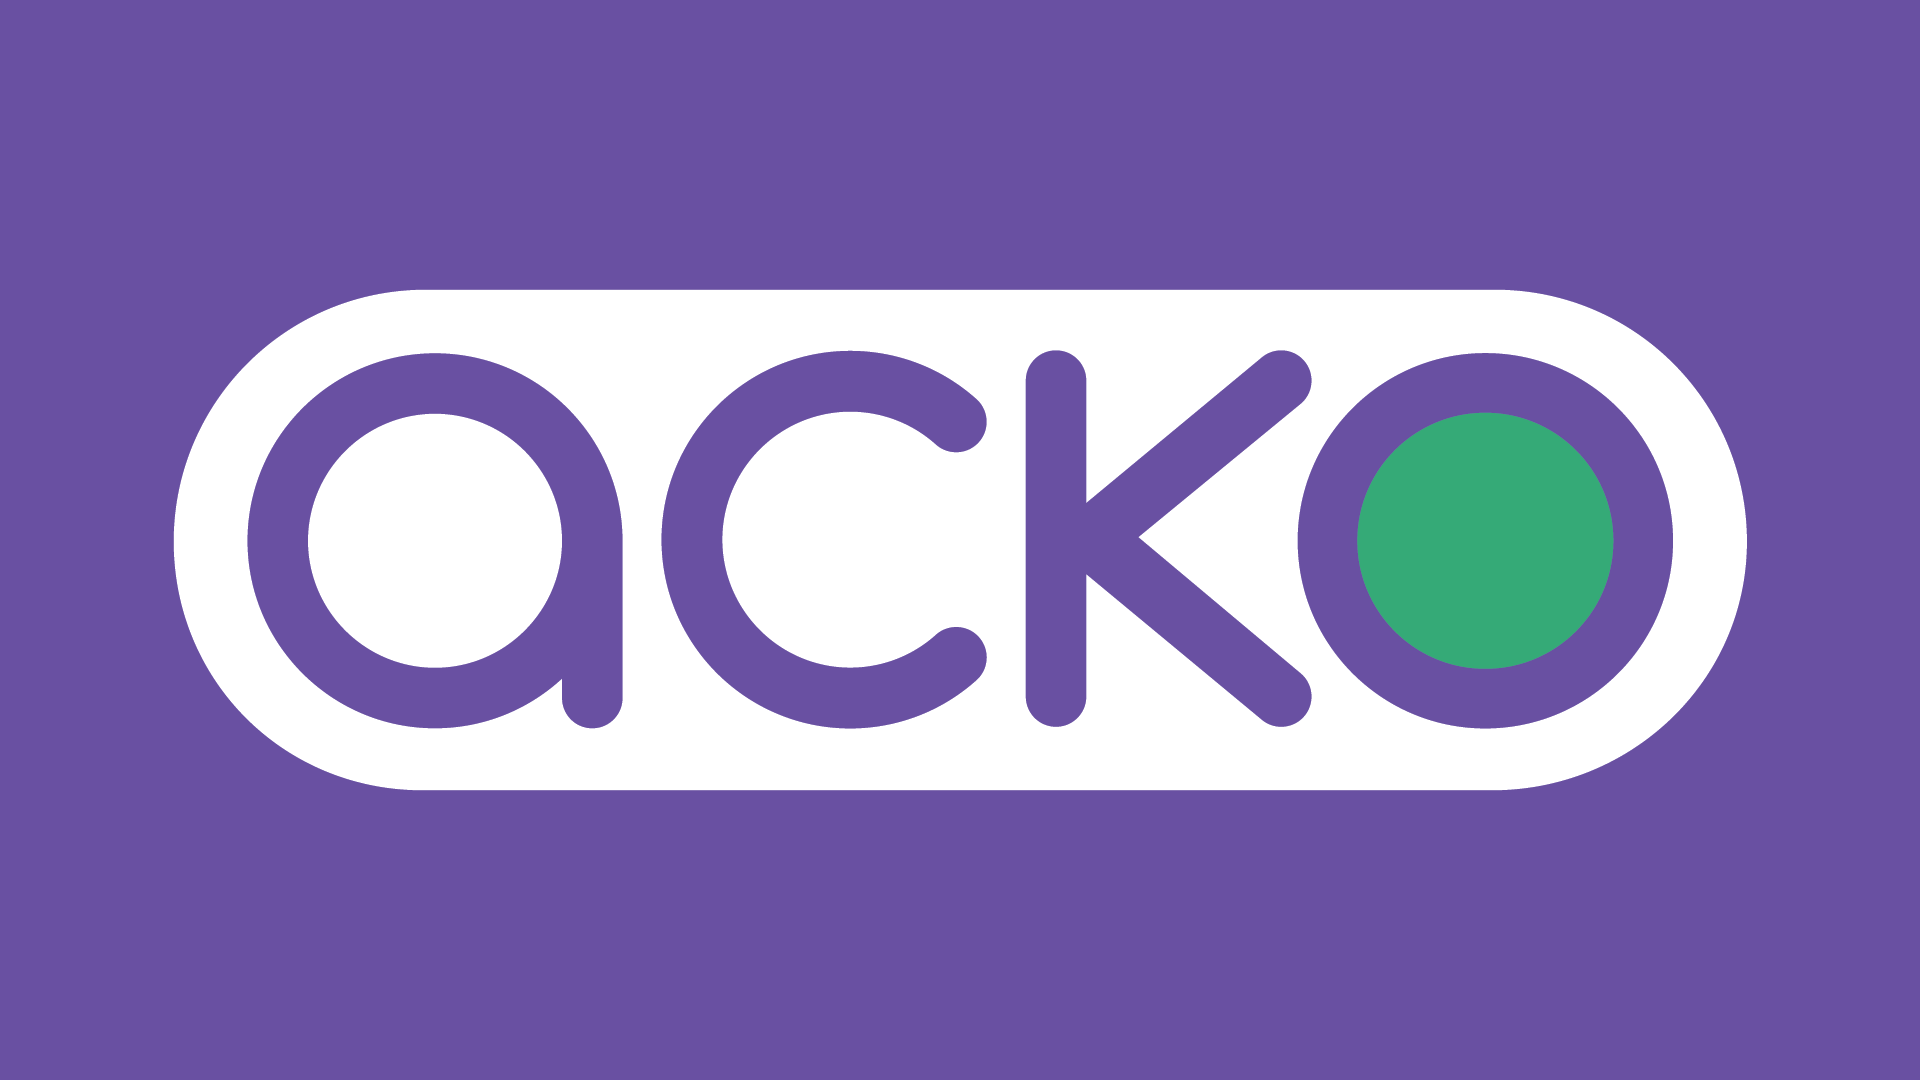 Learn more about ACKO